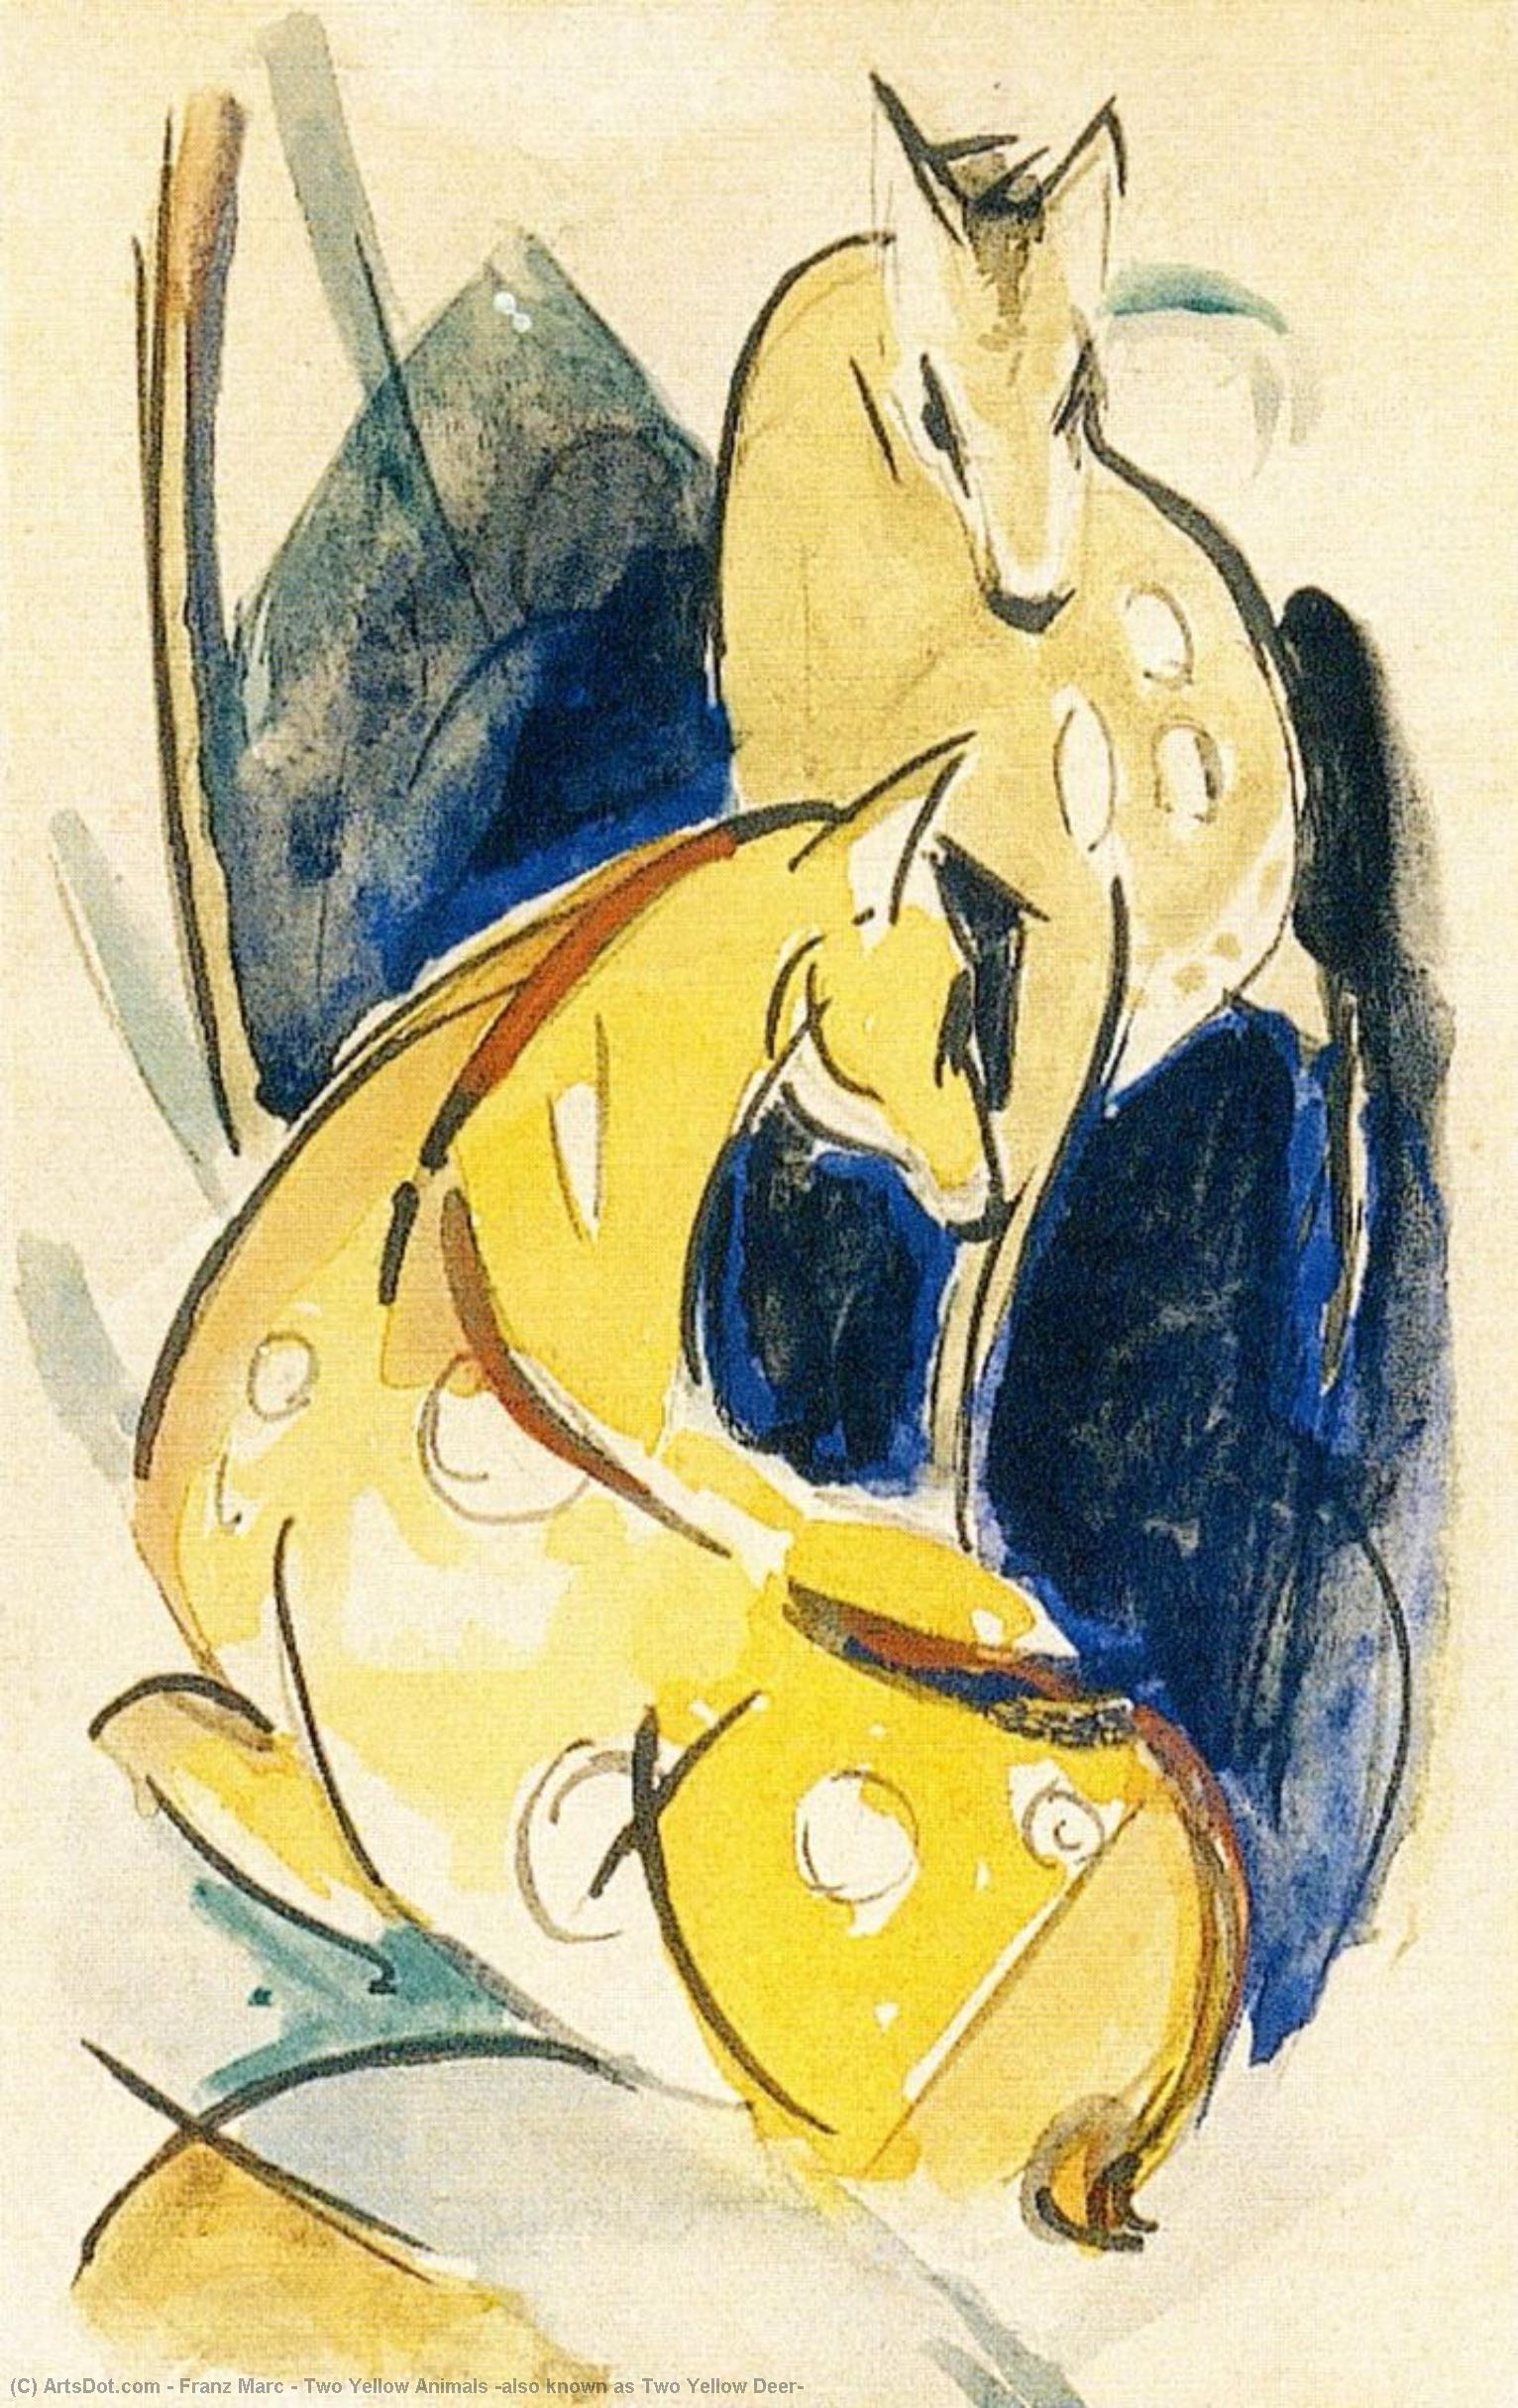 Buy Museum Art Reproductions Two Yellow Animals (also known as Two Yellow Deer), 1913 by Franz Marc (1880-1916, Germany) | ArtsDot.com